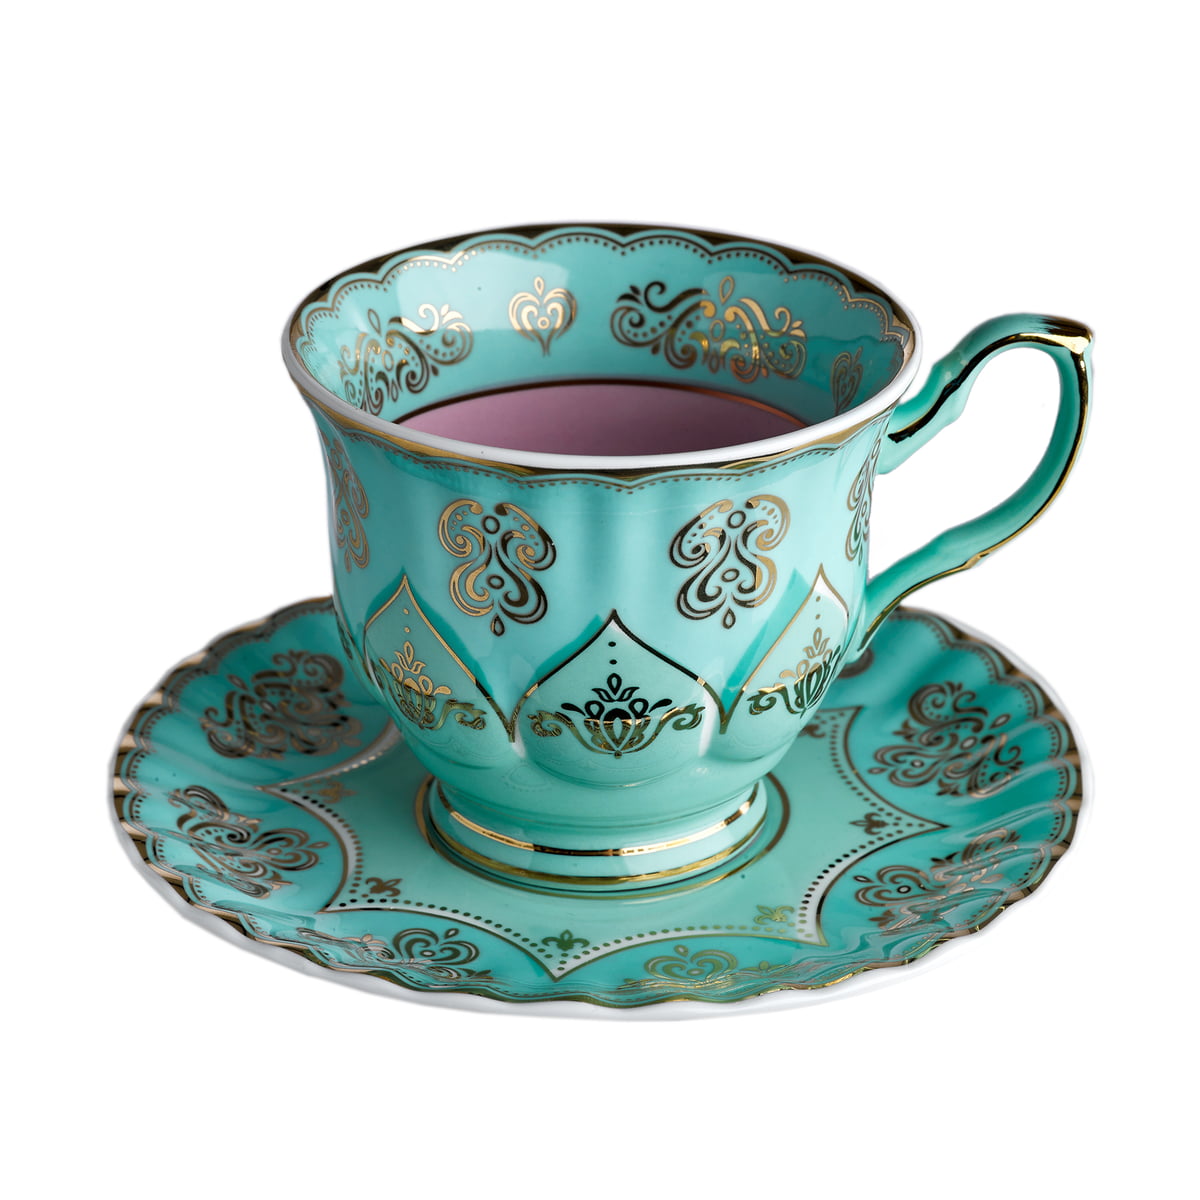 Pols Potten - Grandpa cup with saucer